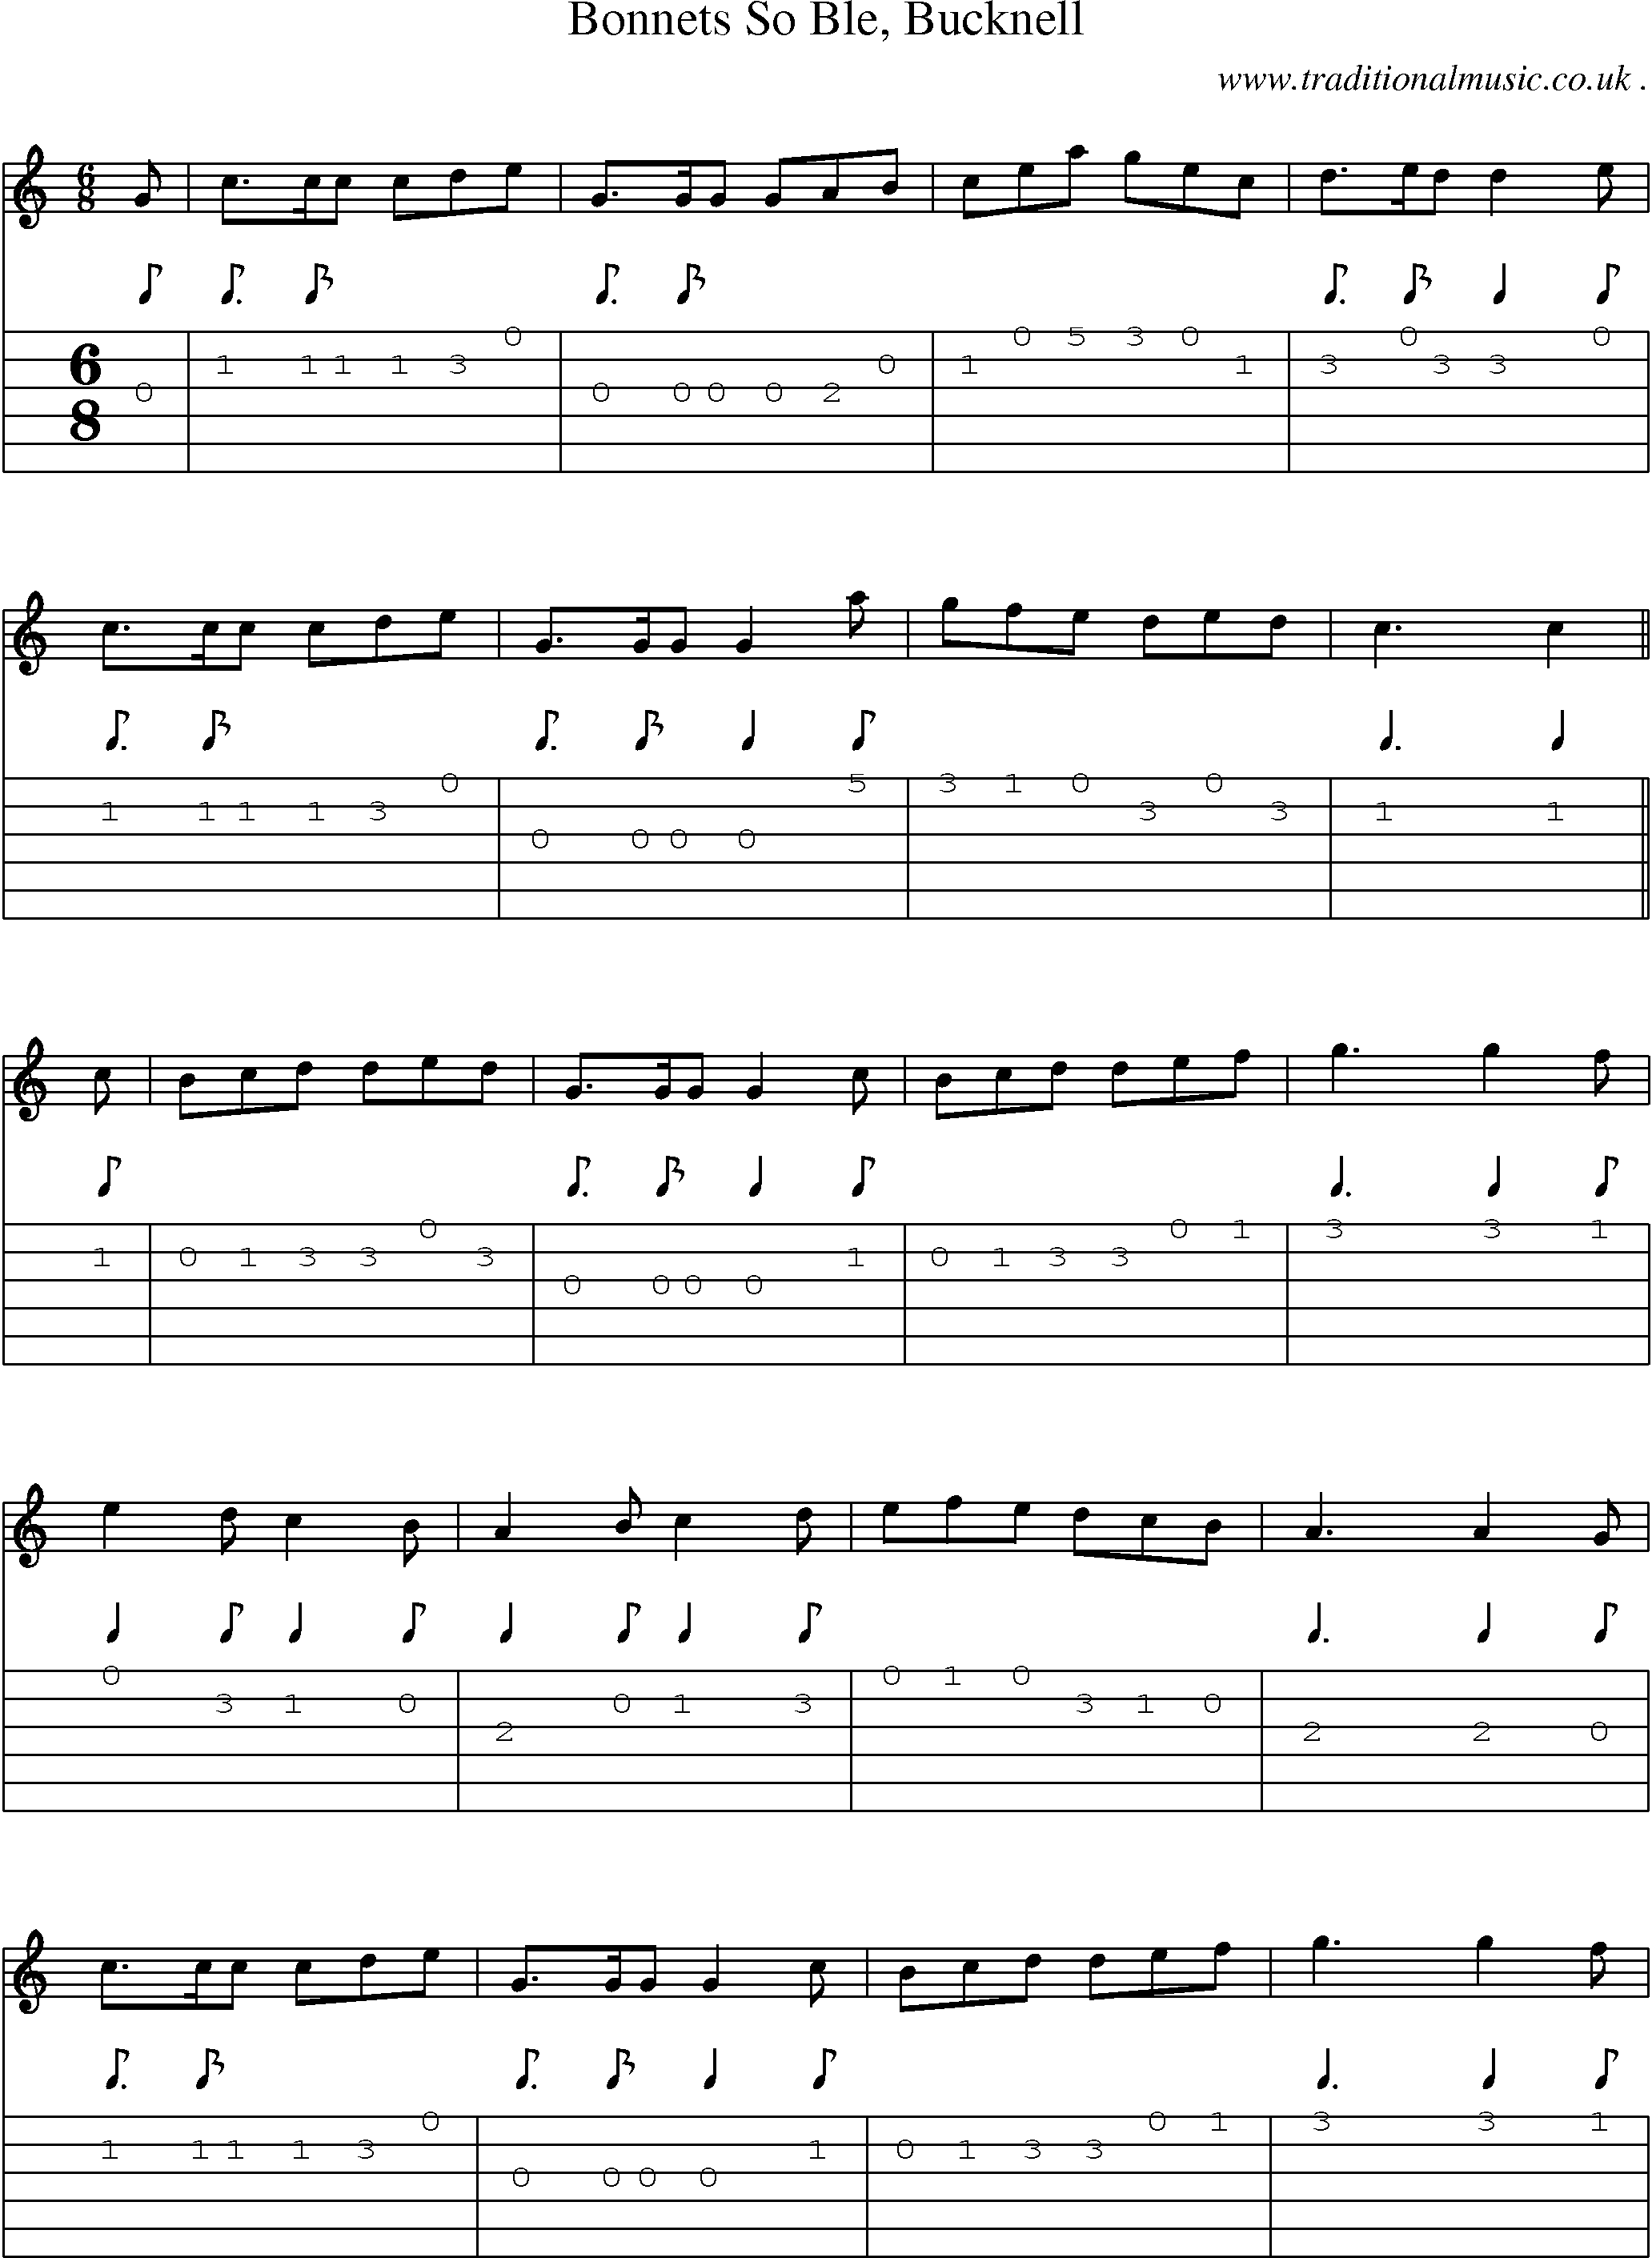 Sheet-Music and Guitar Tabs for Bonnets So Ble Bucknell